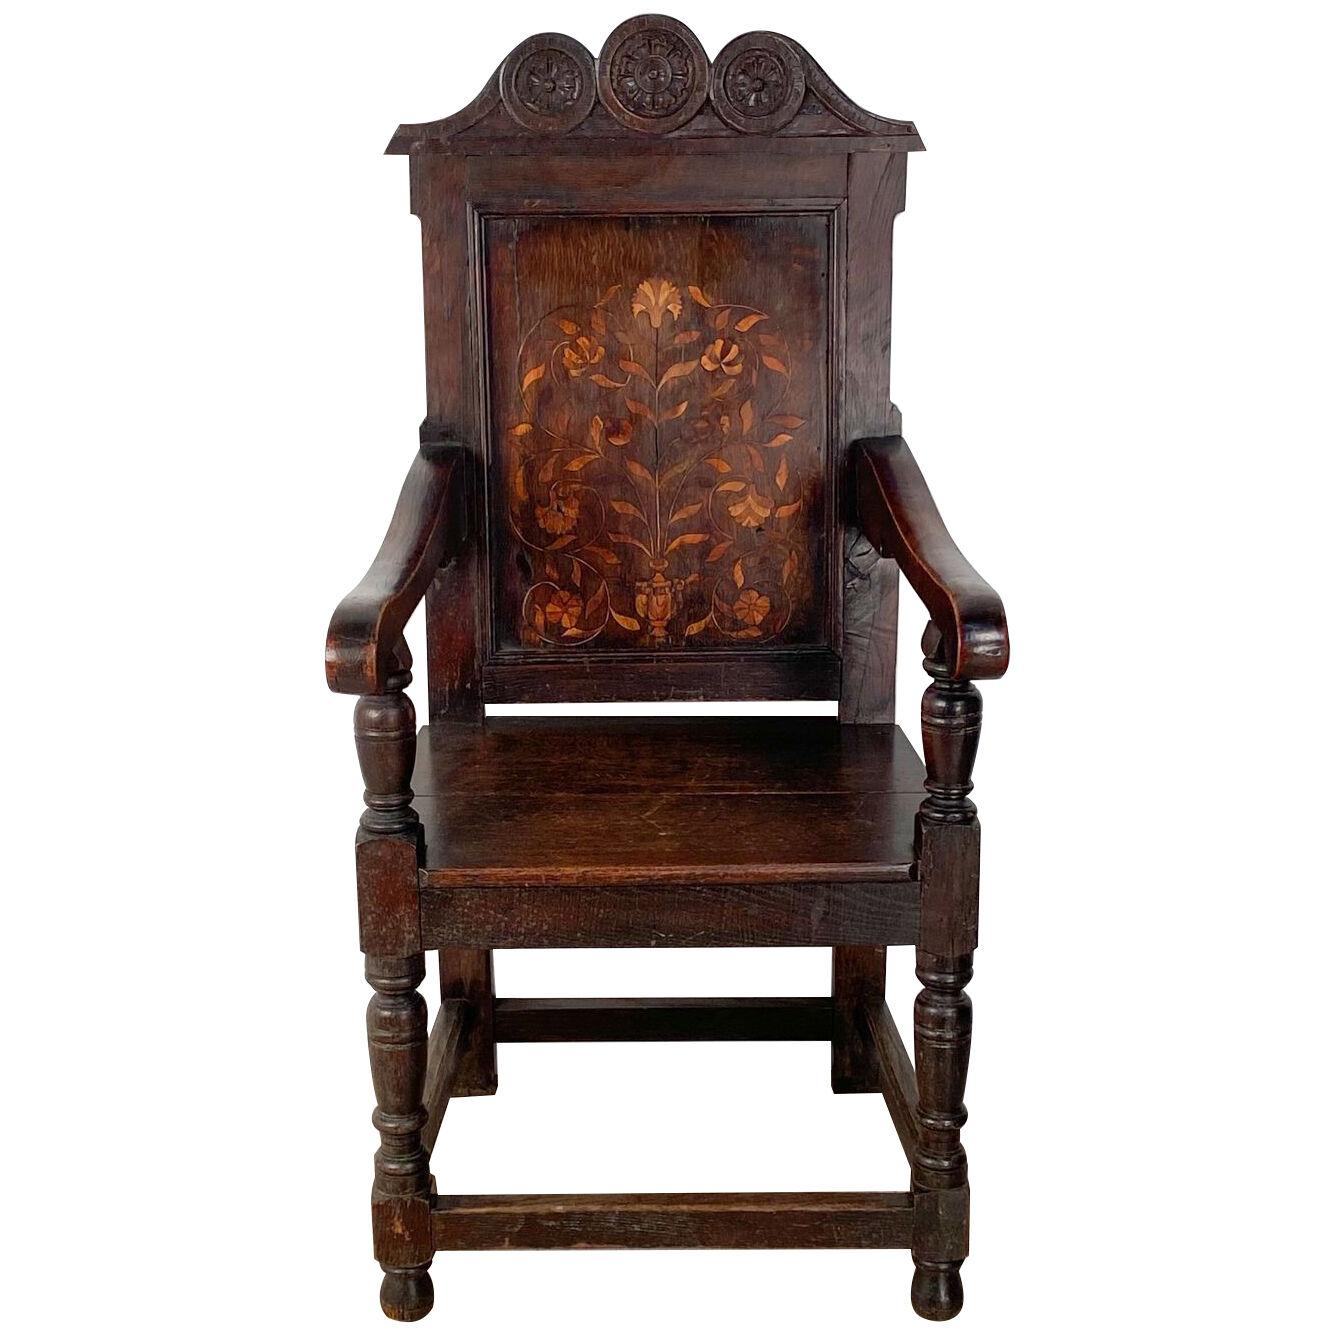 Charles II Oak Armchair with Inlaid Floral Back Panel, circa 1680